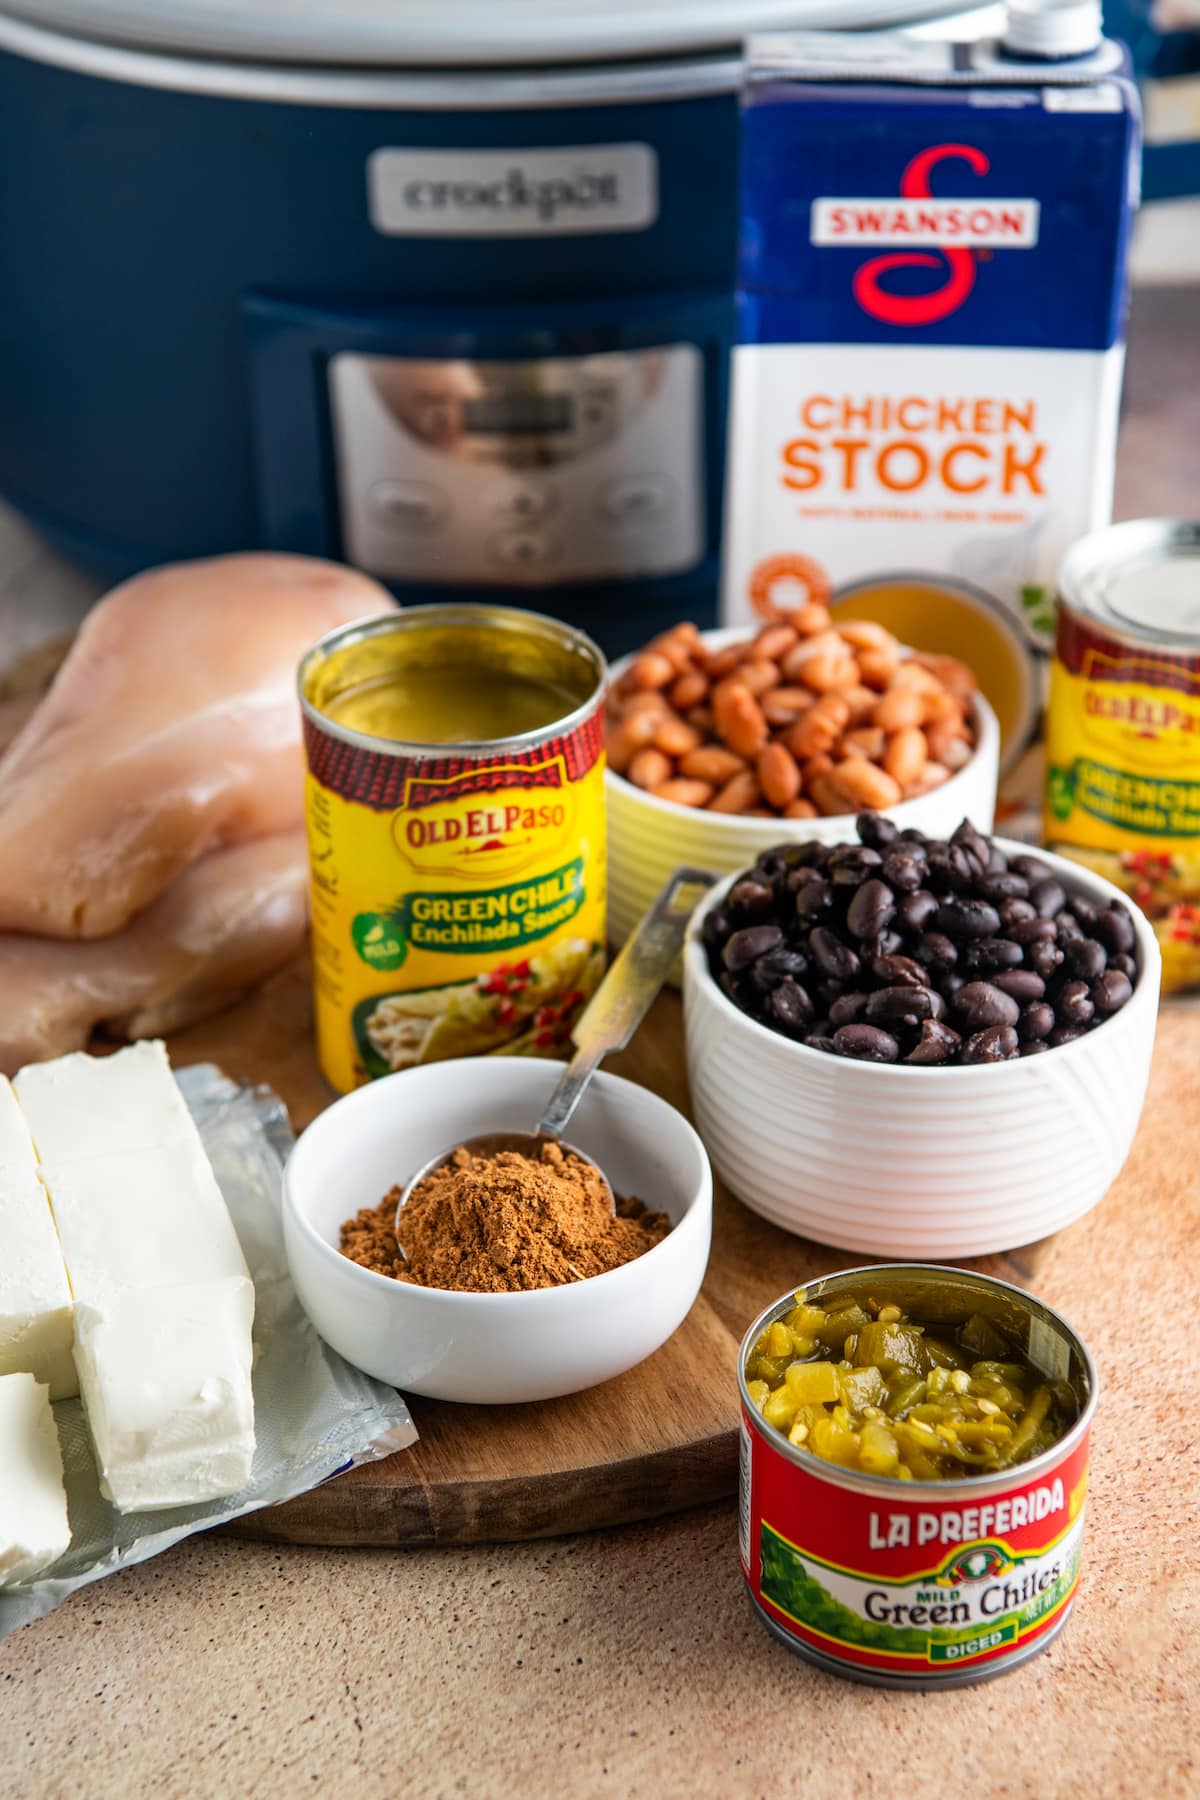 All the ingredients needed for chicken enchilada soup: a bowl of pinto beans, a bowl of black beans, a can of enchilada sauce, a can of green chiles, a bowl of taco seasoning, a carton of chicken stock, a block of cream cheese, and raw chicken breasts, in front of a crockpot.